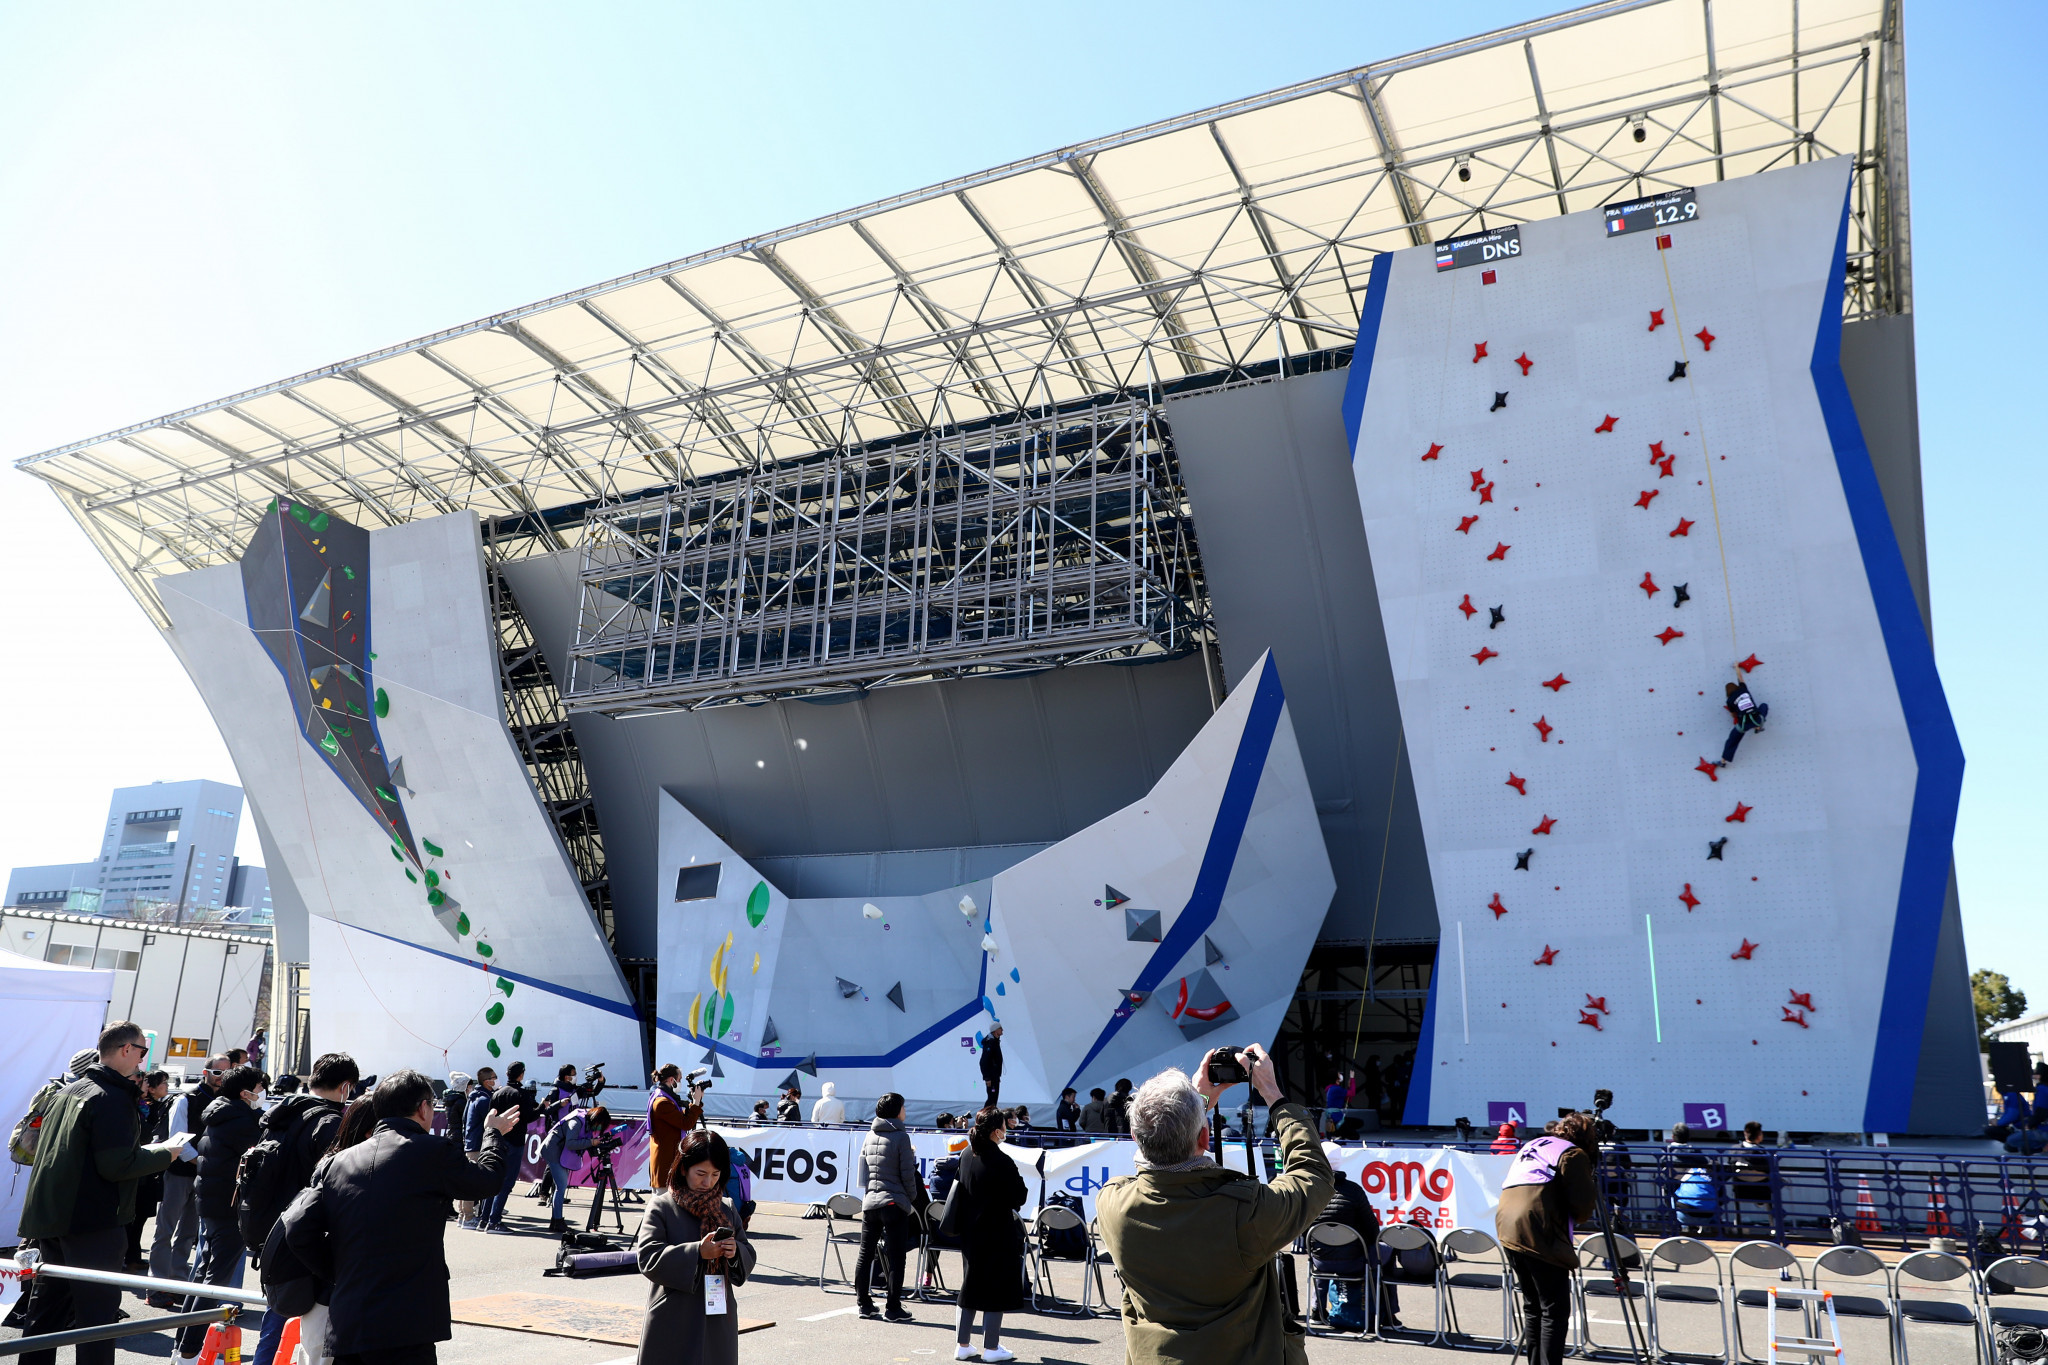 Sport climbing is set to take place at the Aomi Urban Sports Park during Tokyo 2020 ©Getty Images